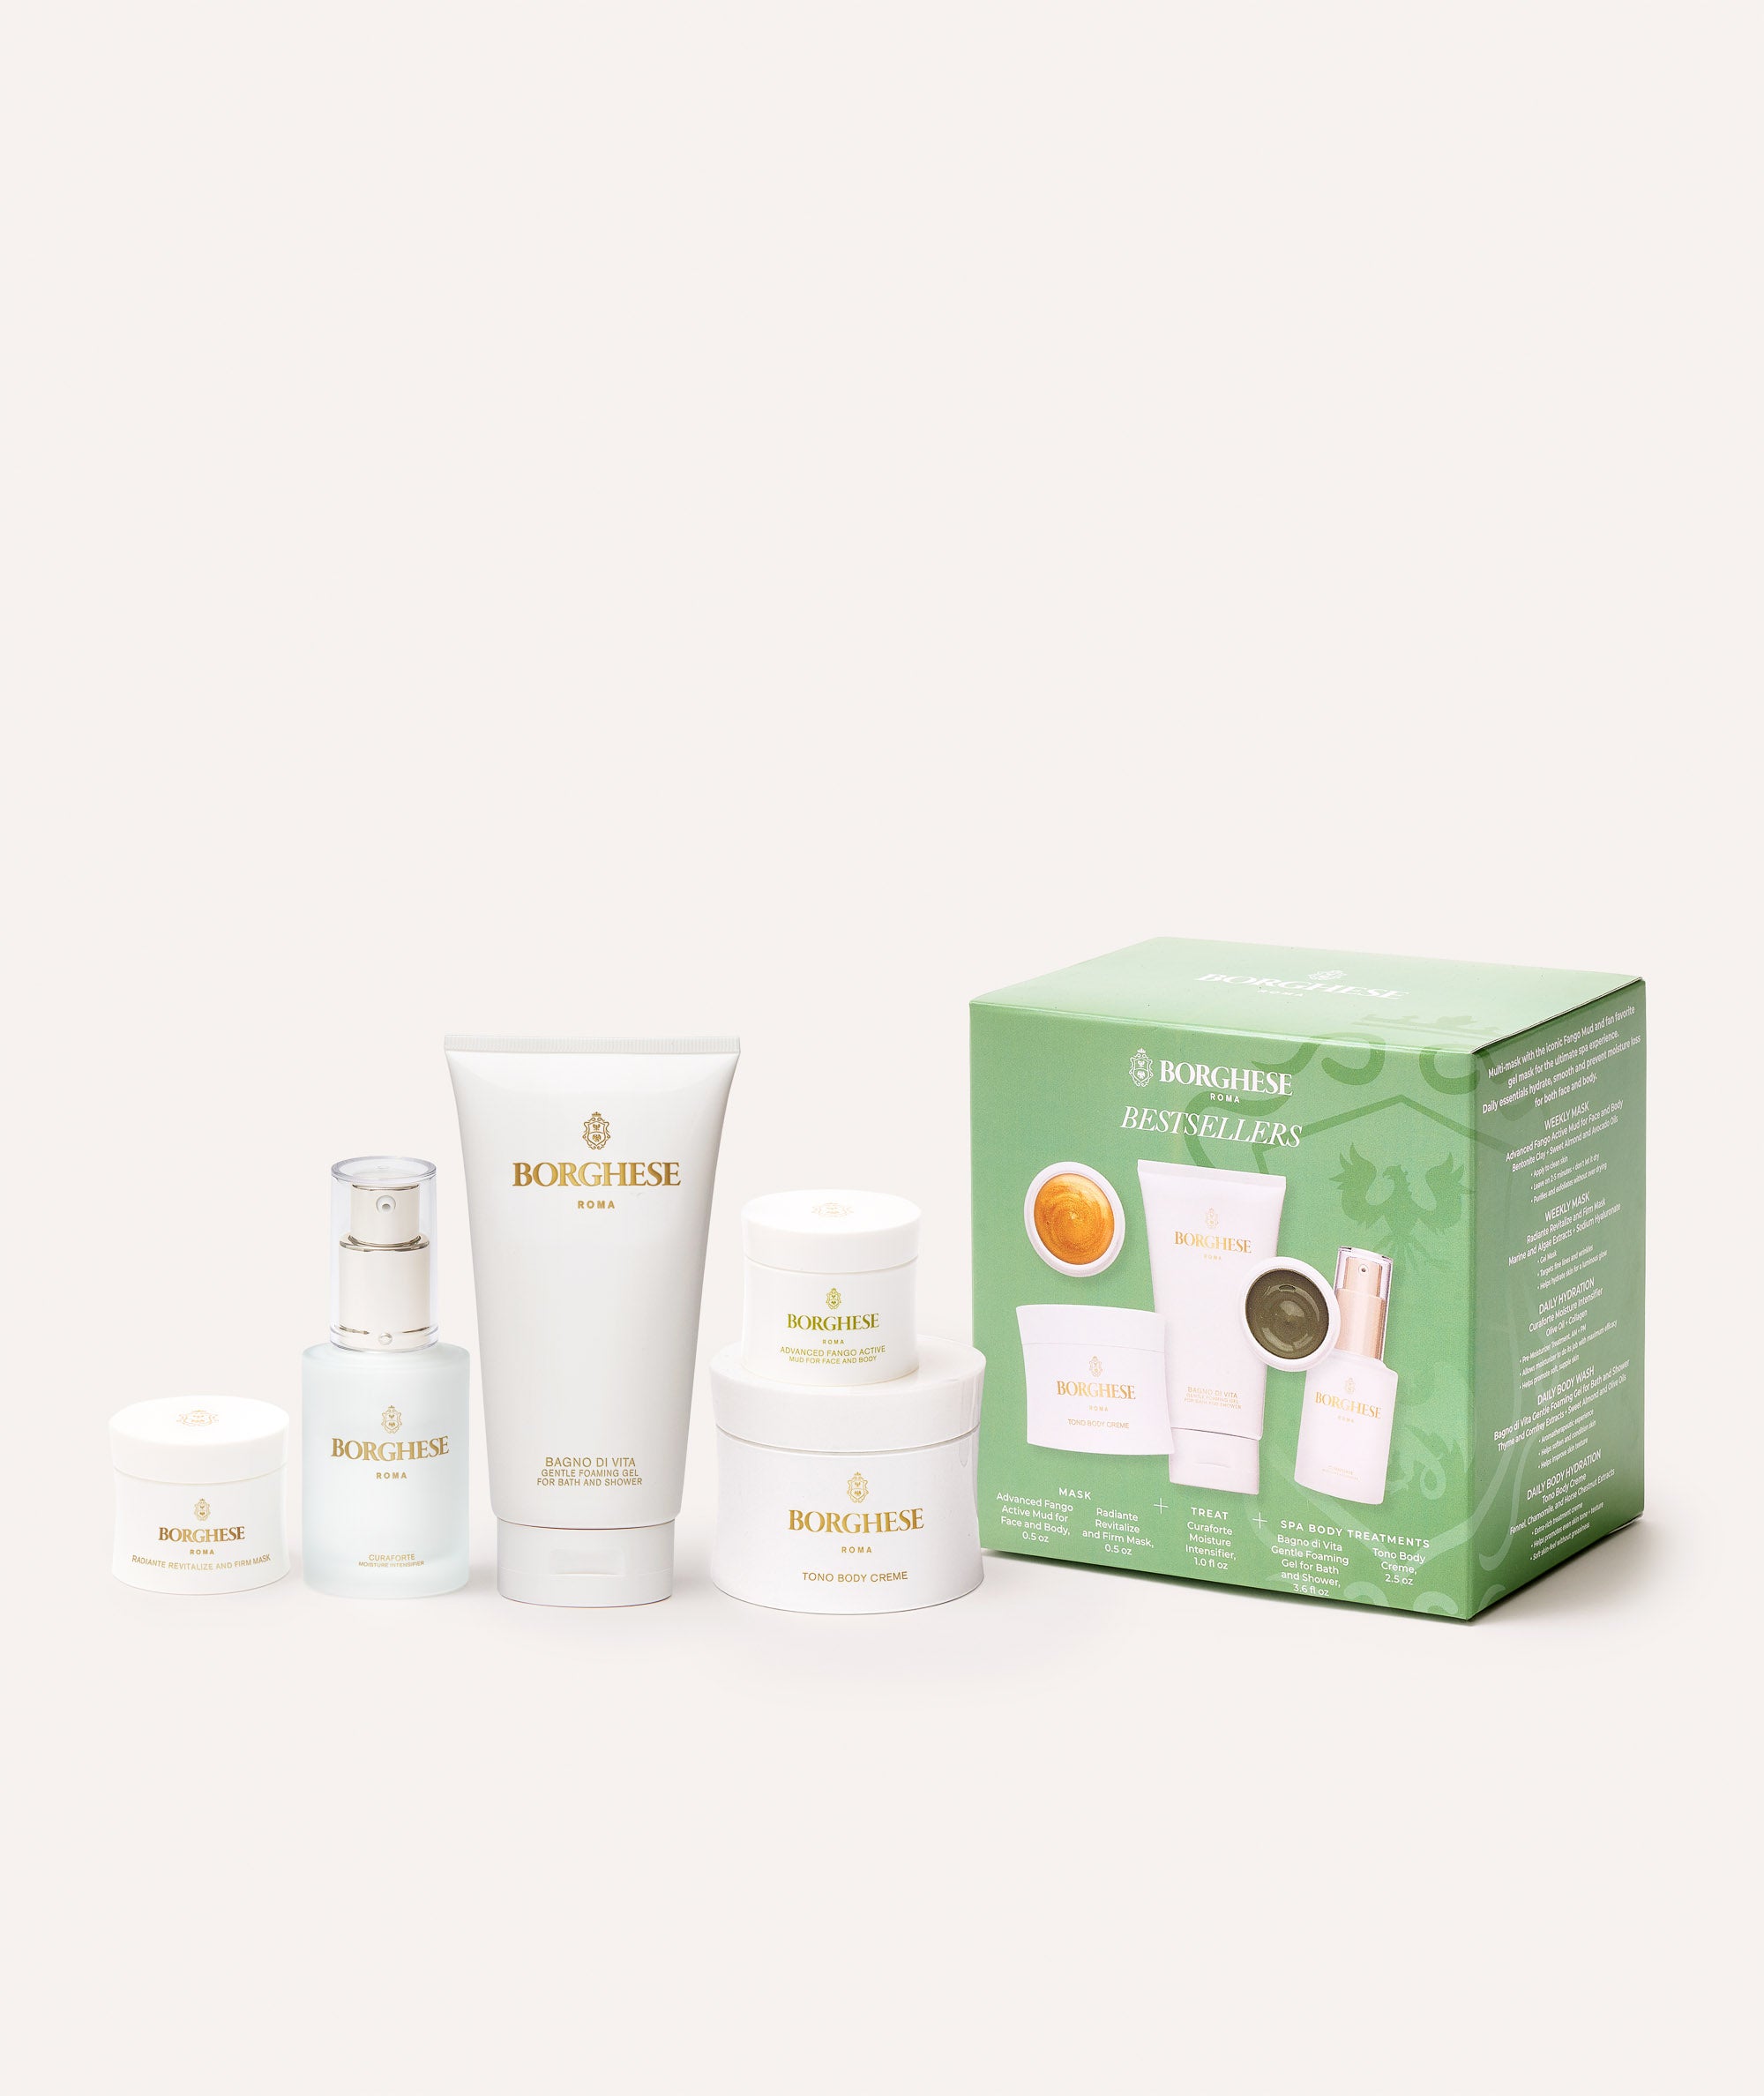 The Borghese 5-Piece Bestsellers Gift Set contents and green gift box